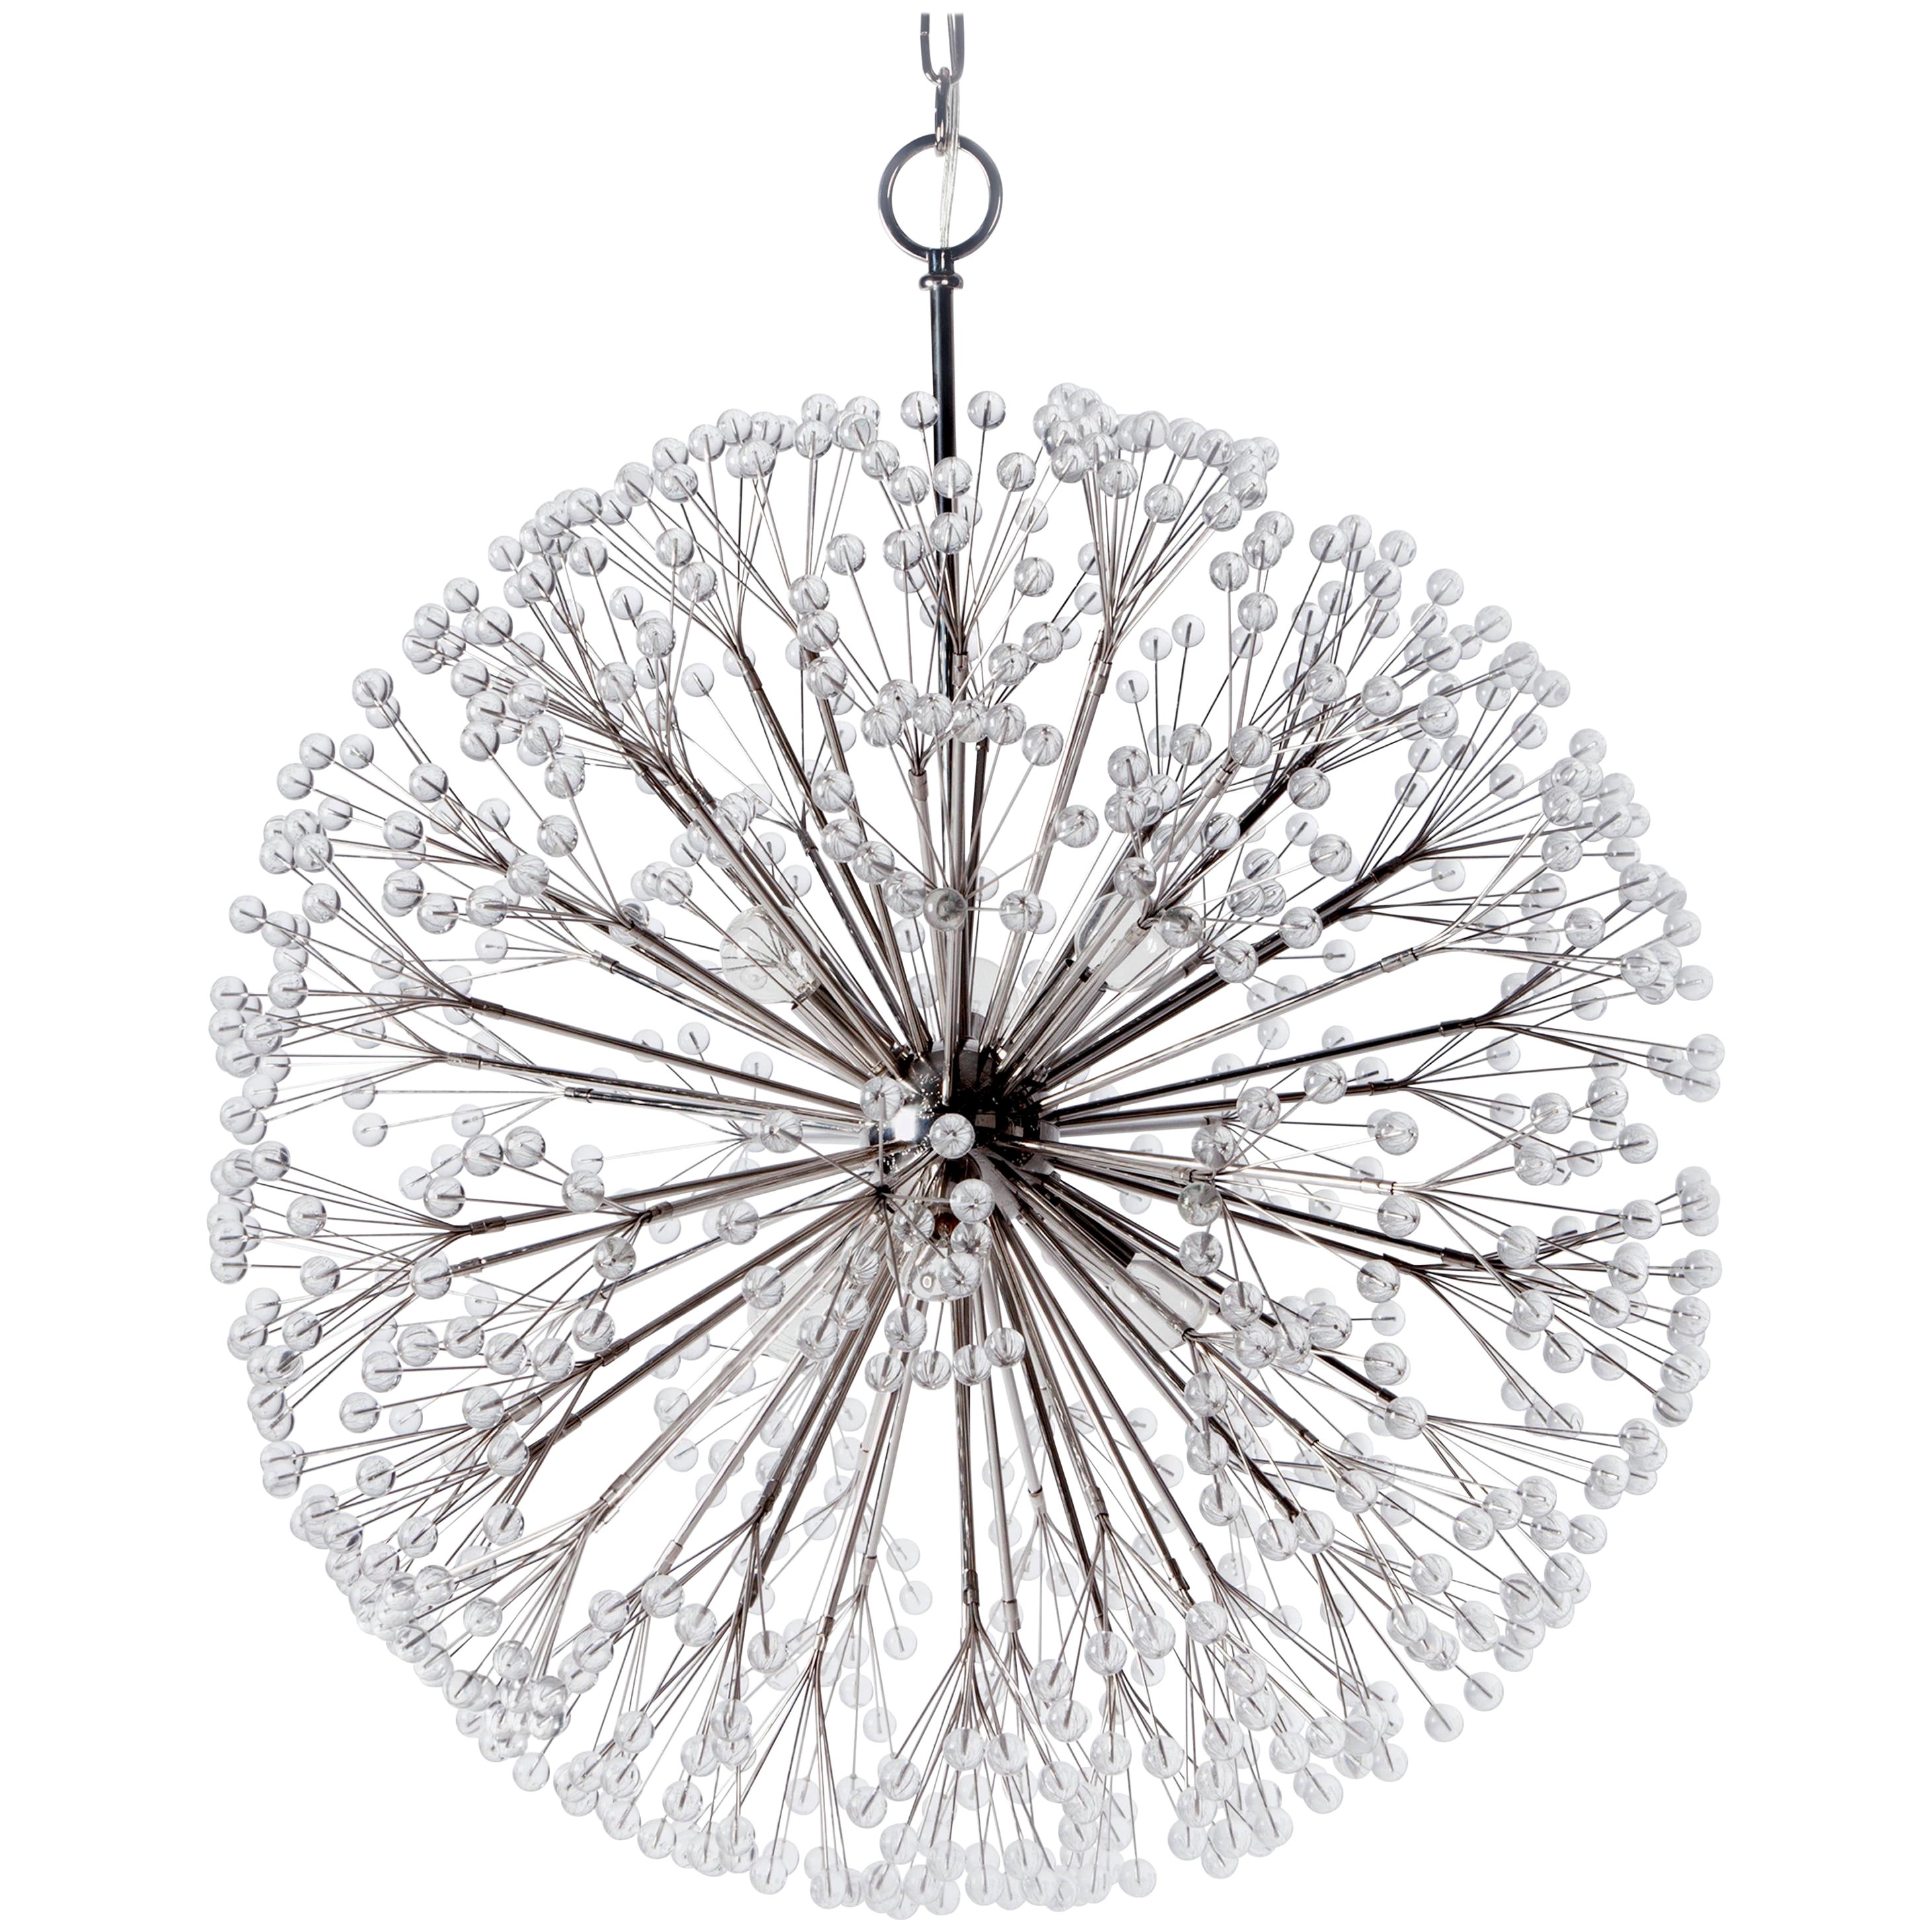 Nickel Dandelion 32 Chandelier Designed by Tony Duquette for Remains Lighting